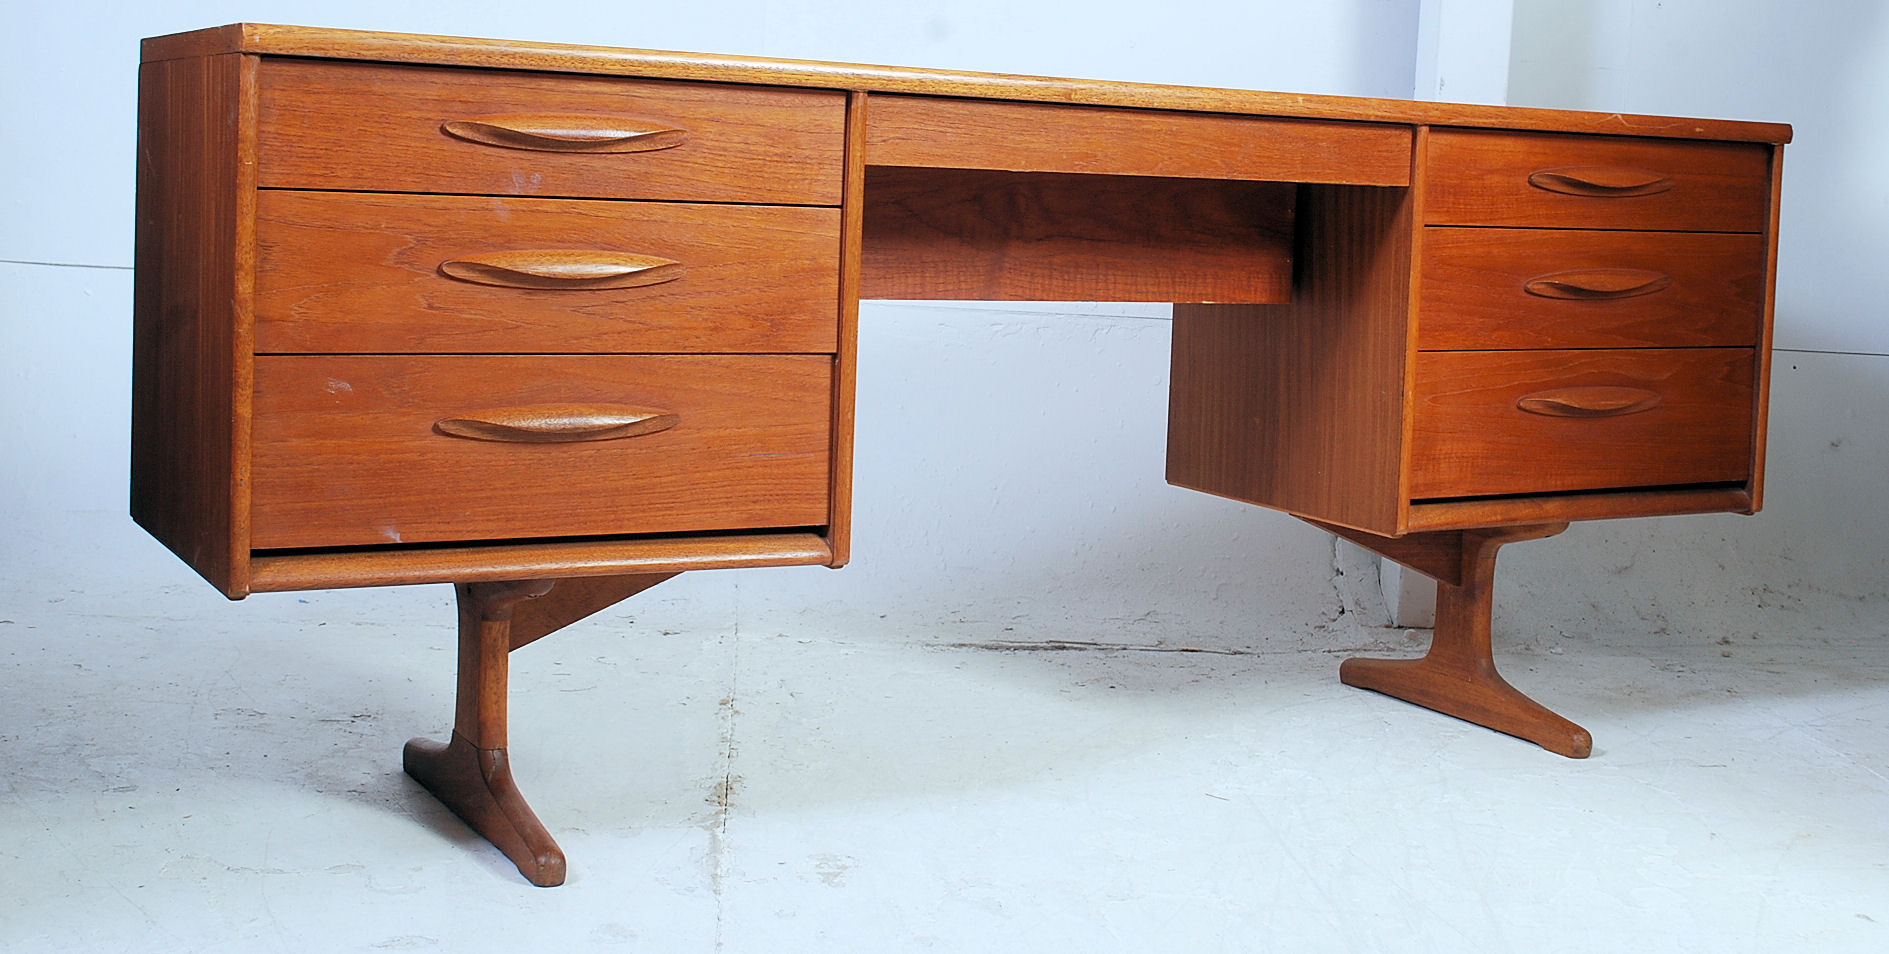 A 1950's large teak wood Danish style writing table desk - dressing chest being raised on angled